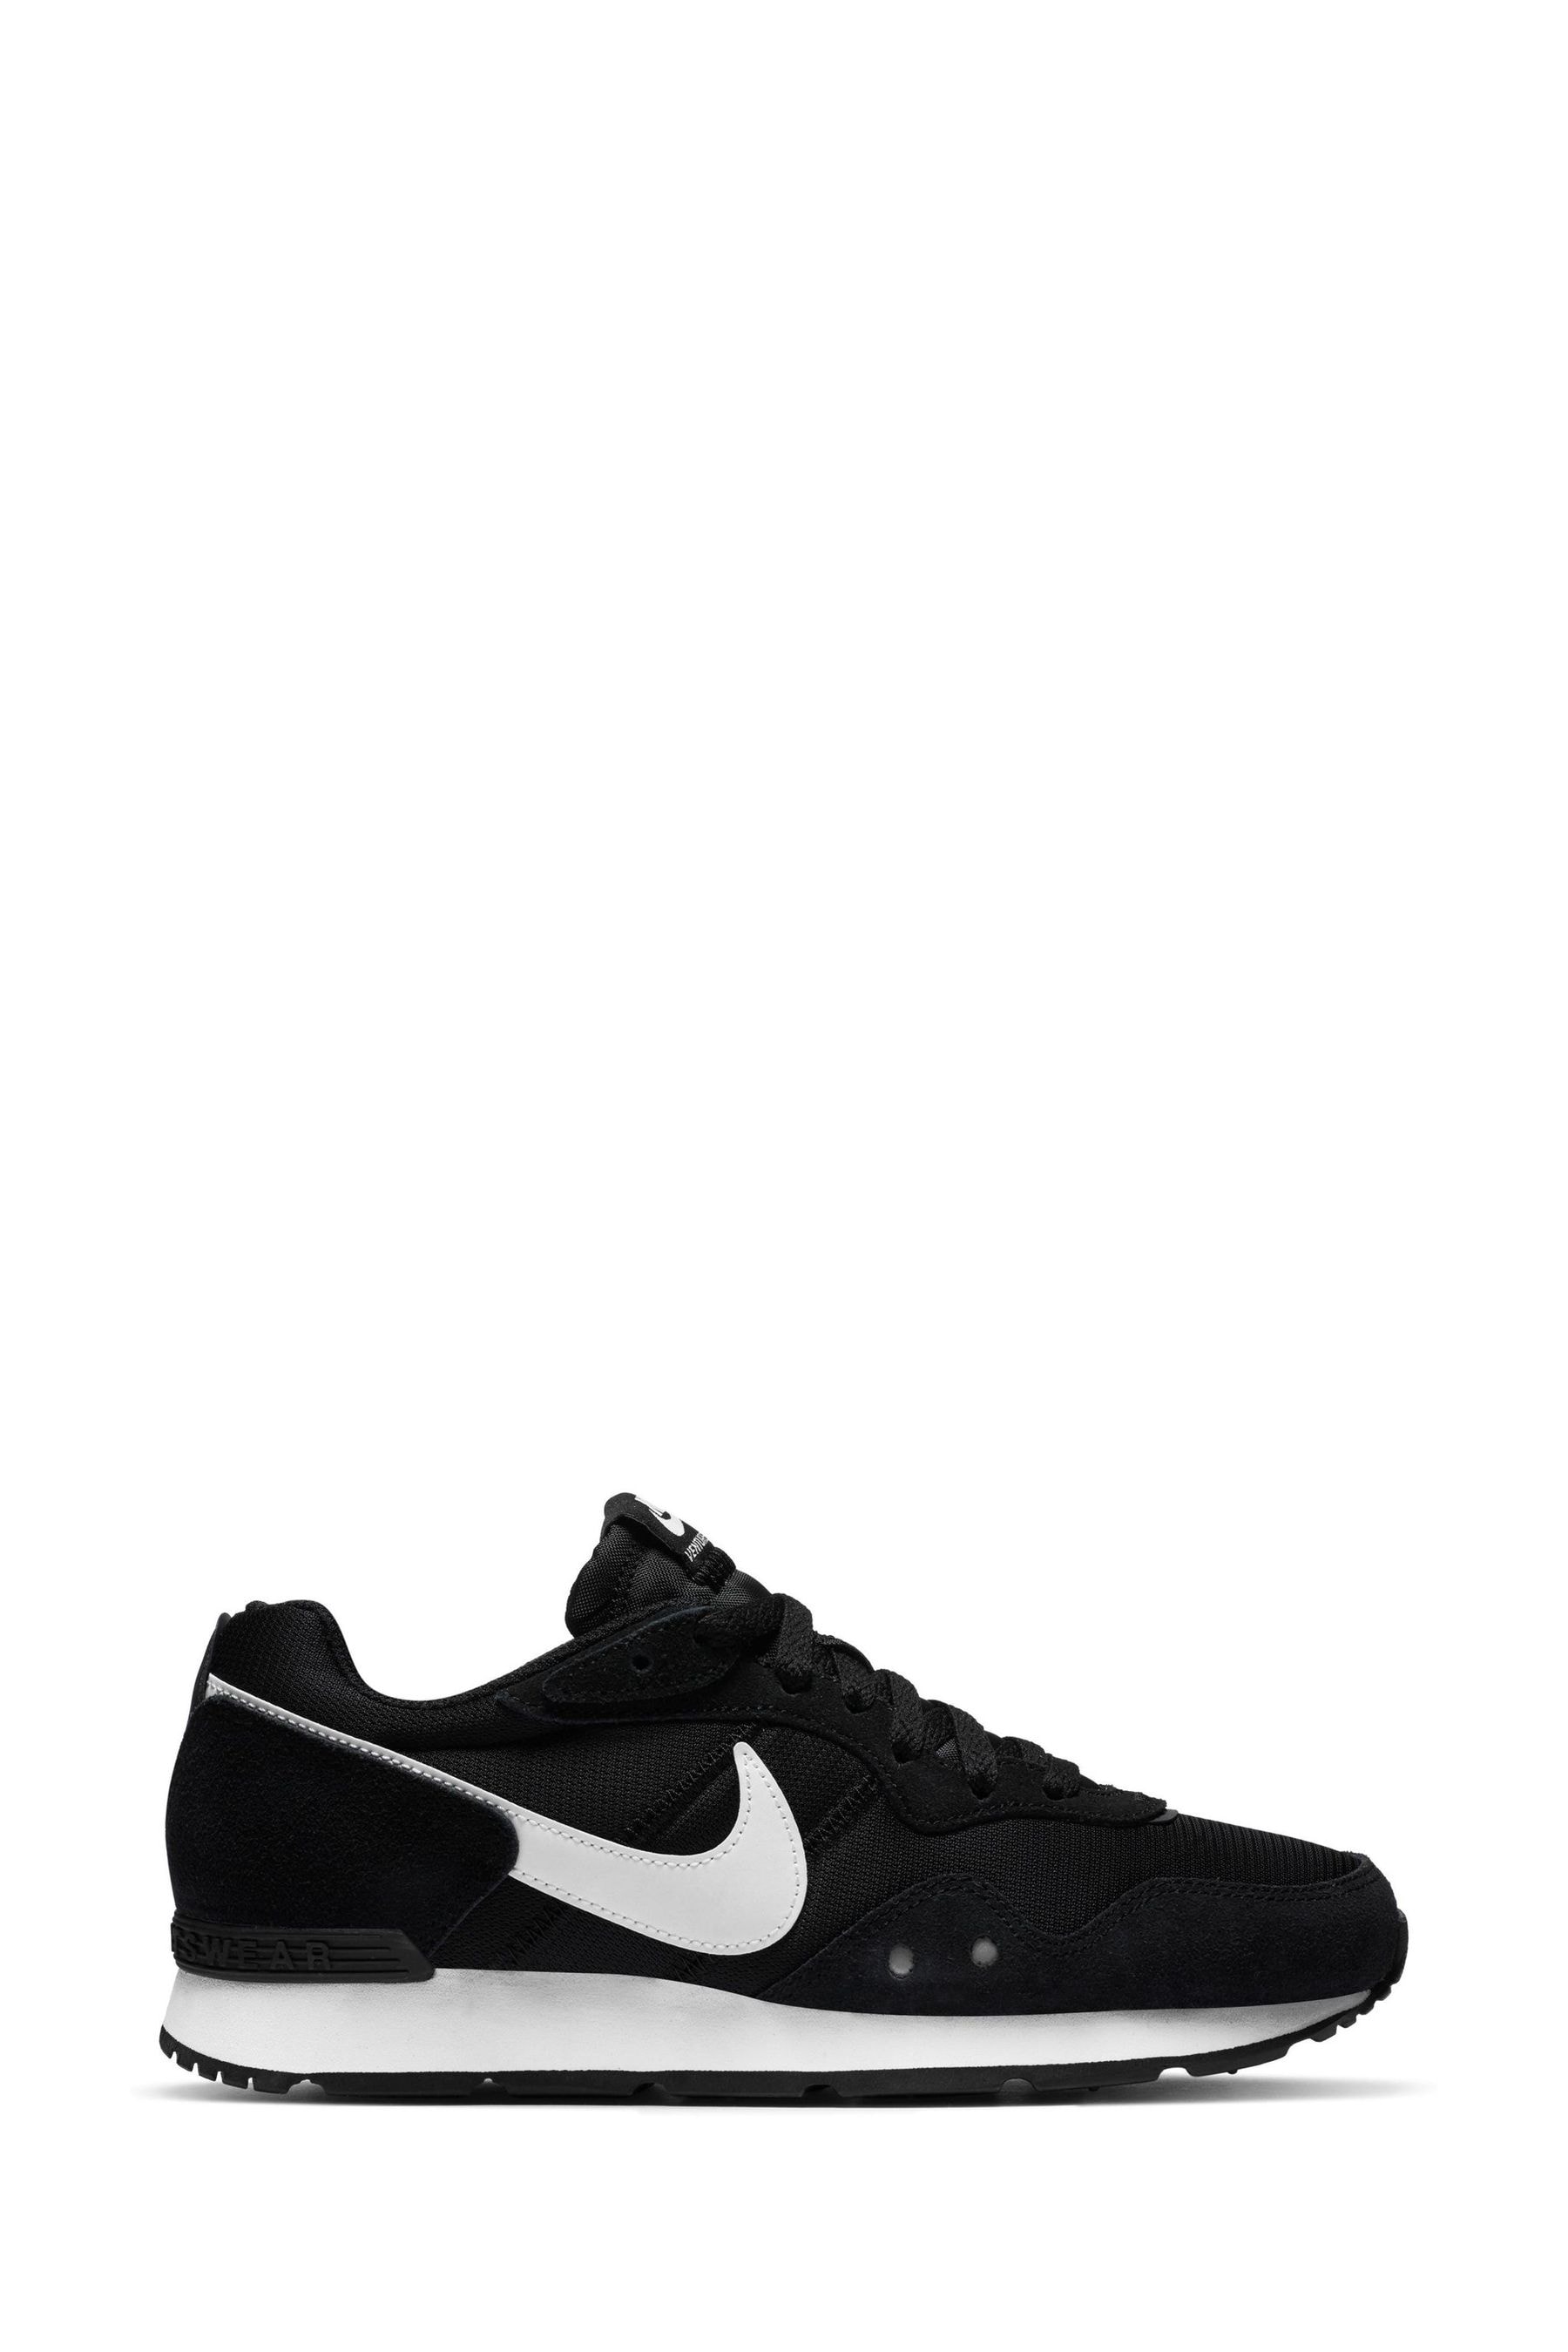 Buy Nike Venture Runner Trainers from the Next UK online shop